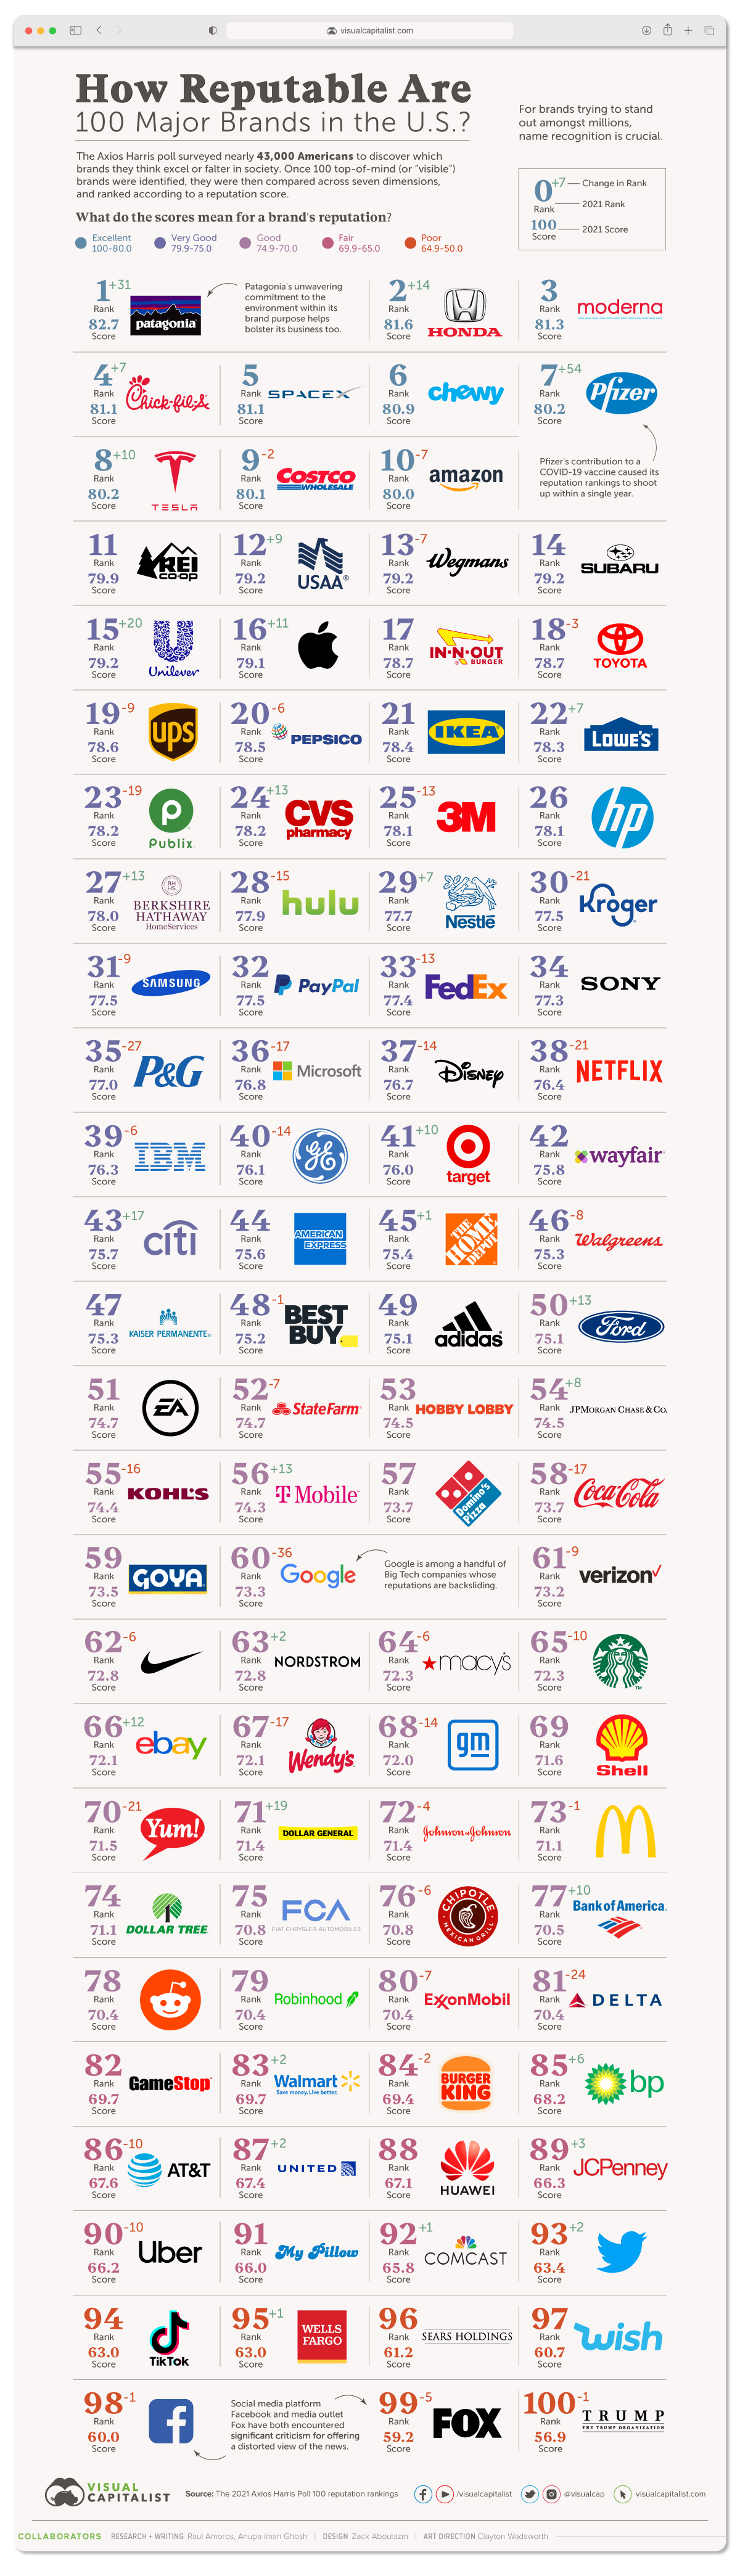 Ranked: The Reputation of 100 Major Brands in the U.S.